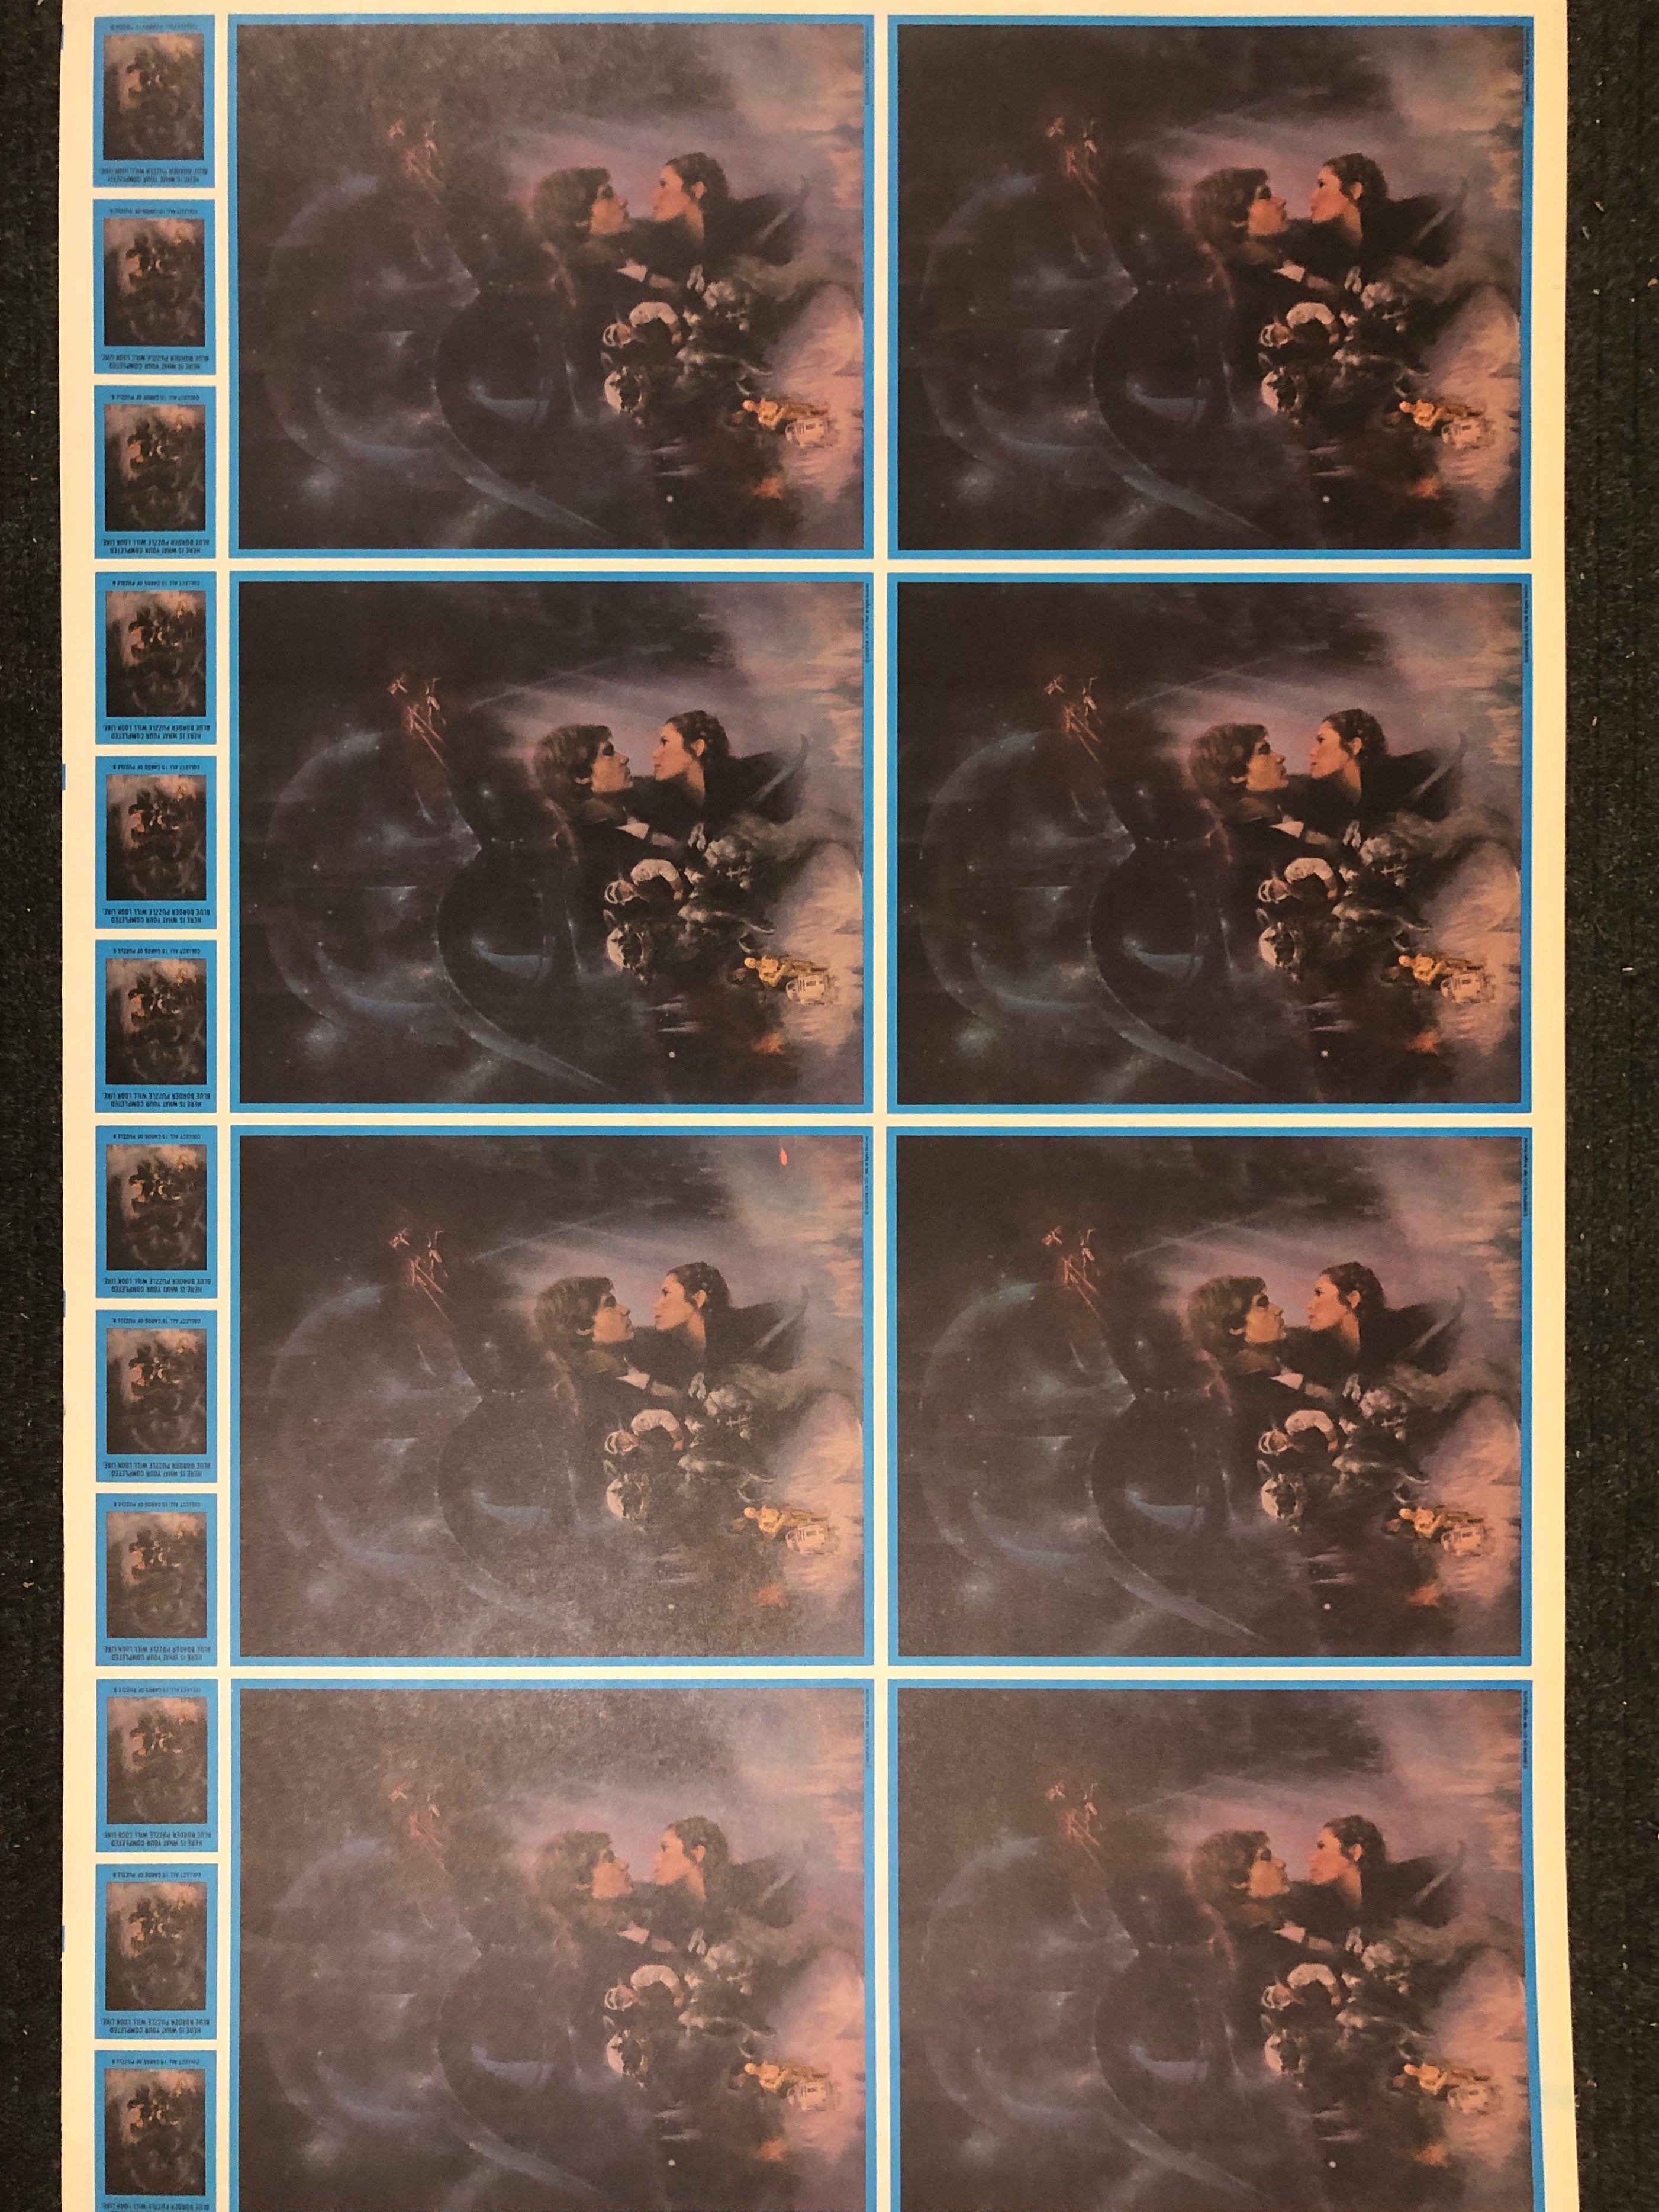 1981 Empire Strikes back series 2 stickers rare uncut cards sheet